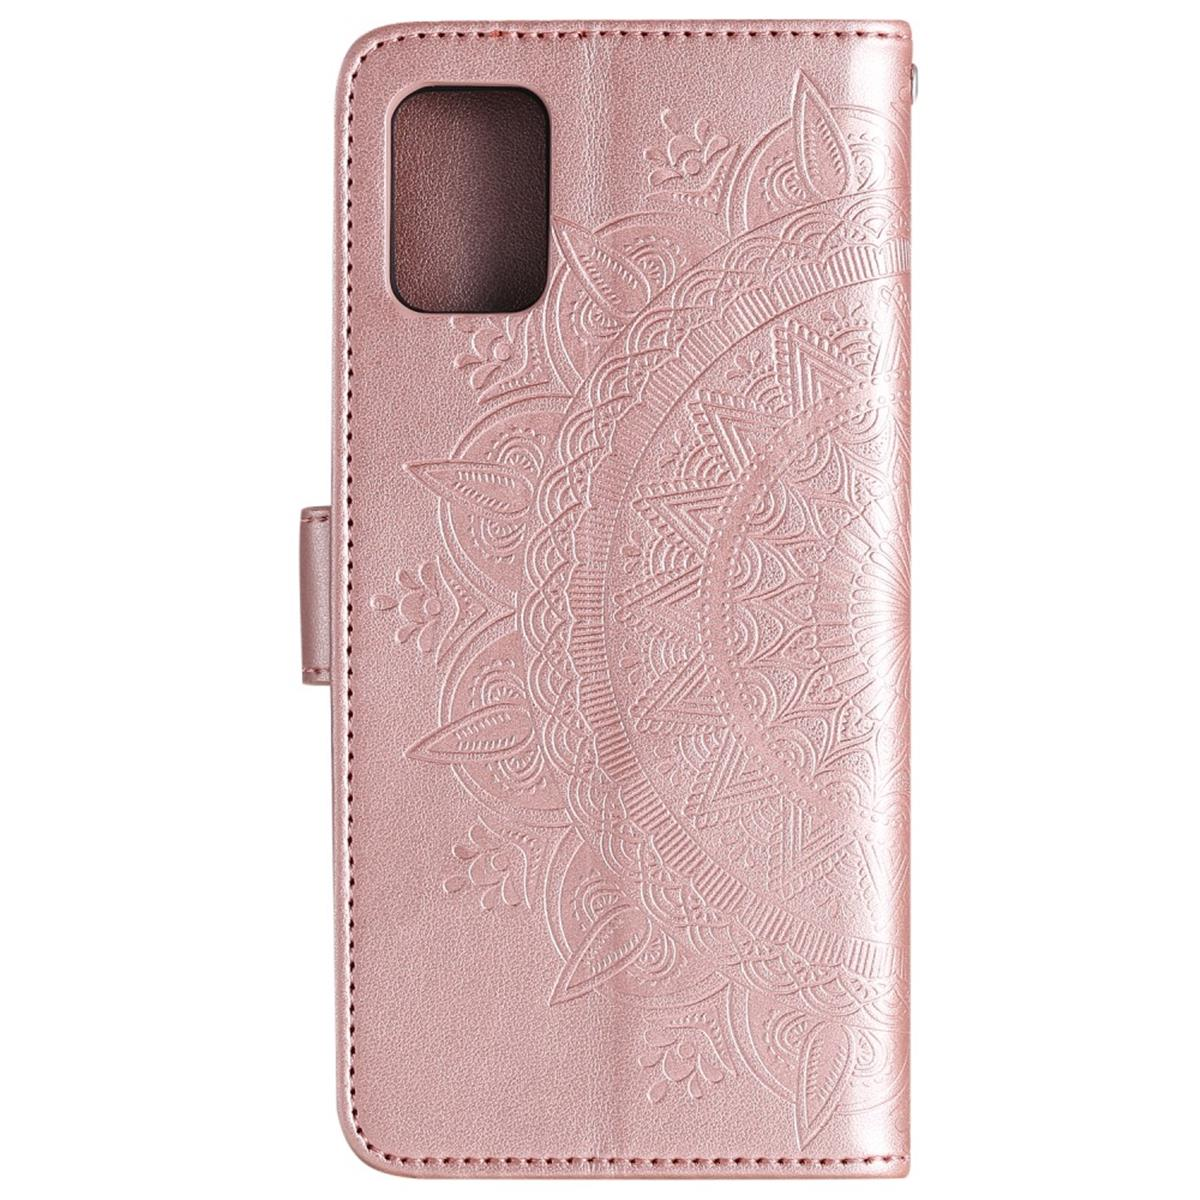 COVERKINGZ Klapphülle mit Mandala Muster, Roségold Samsung, A31, Galaxy Bookcover